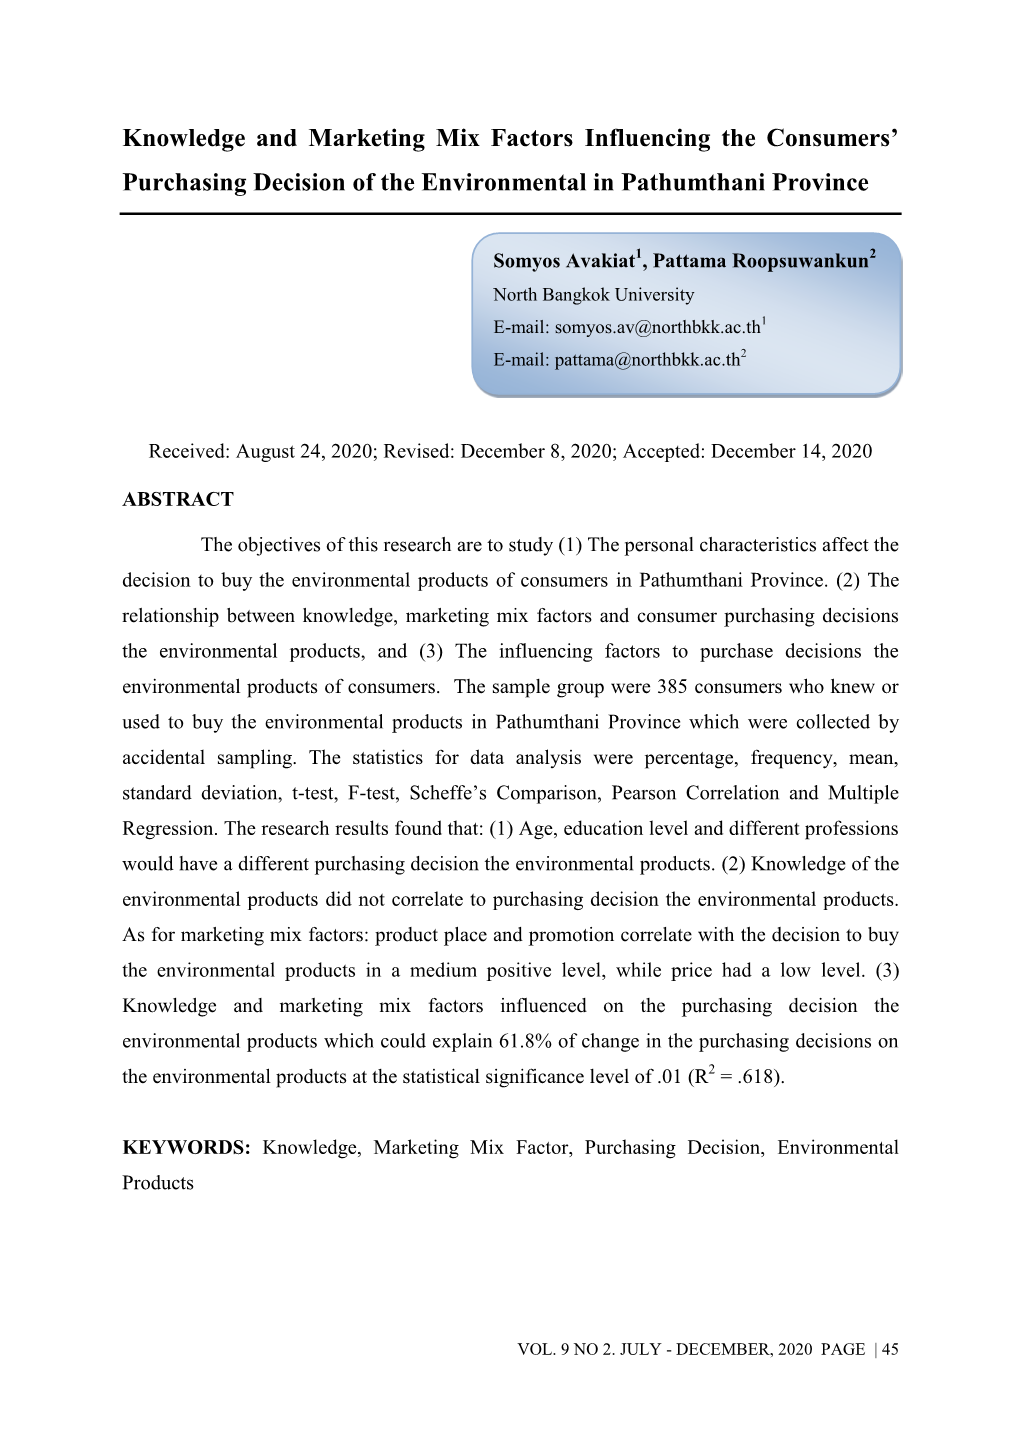 Knowledge and Marketing Mix Factors Influencing the Consumers’ Purchasing Decision of the Environmental in Pathumthani Province